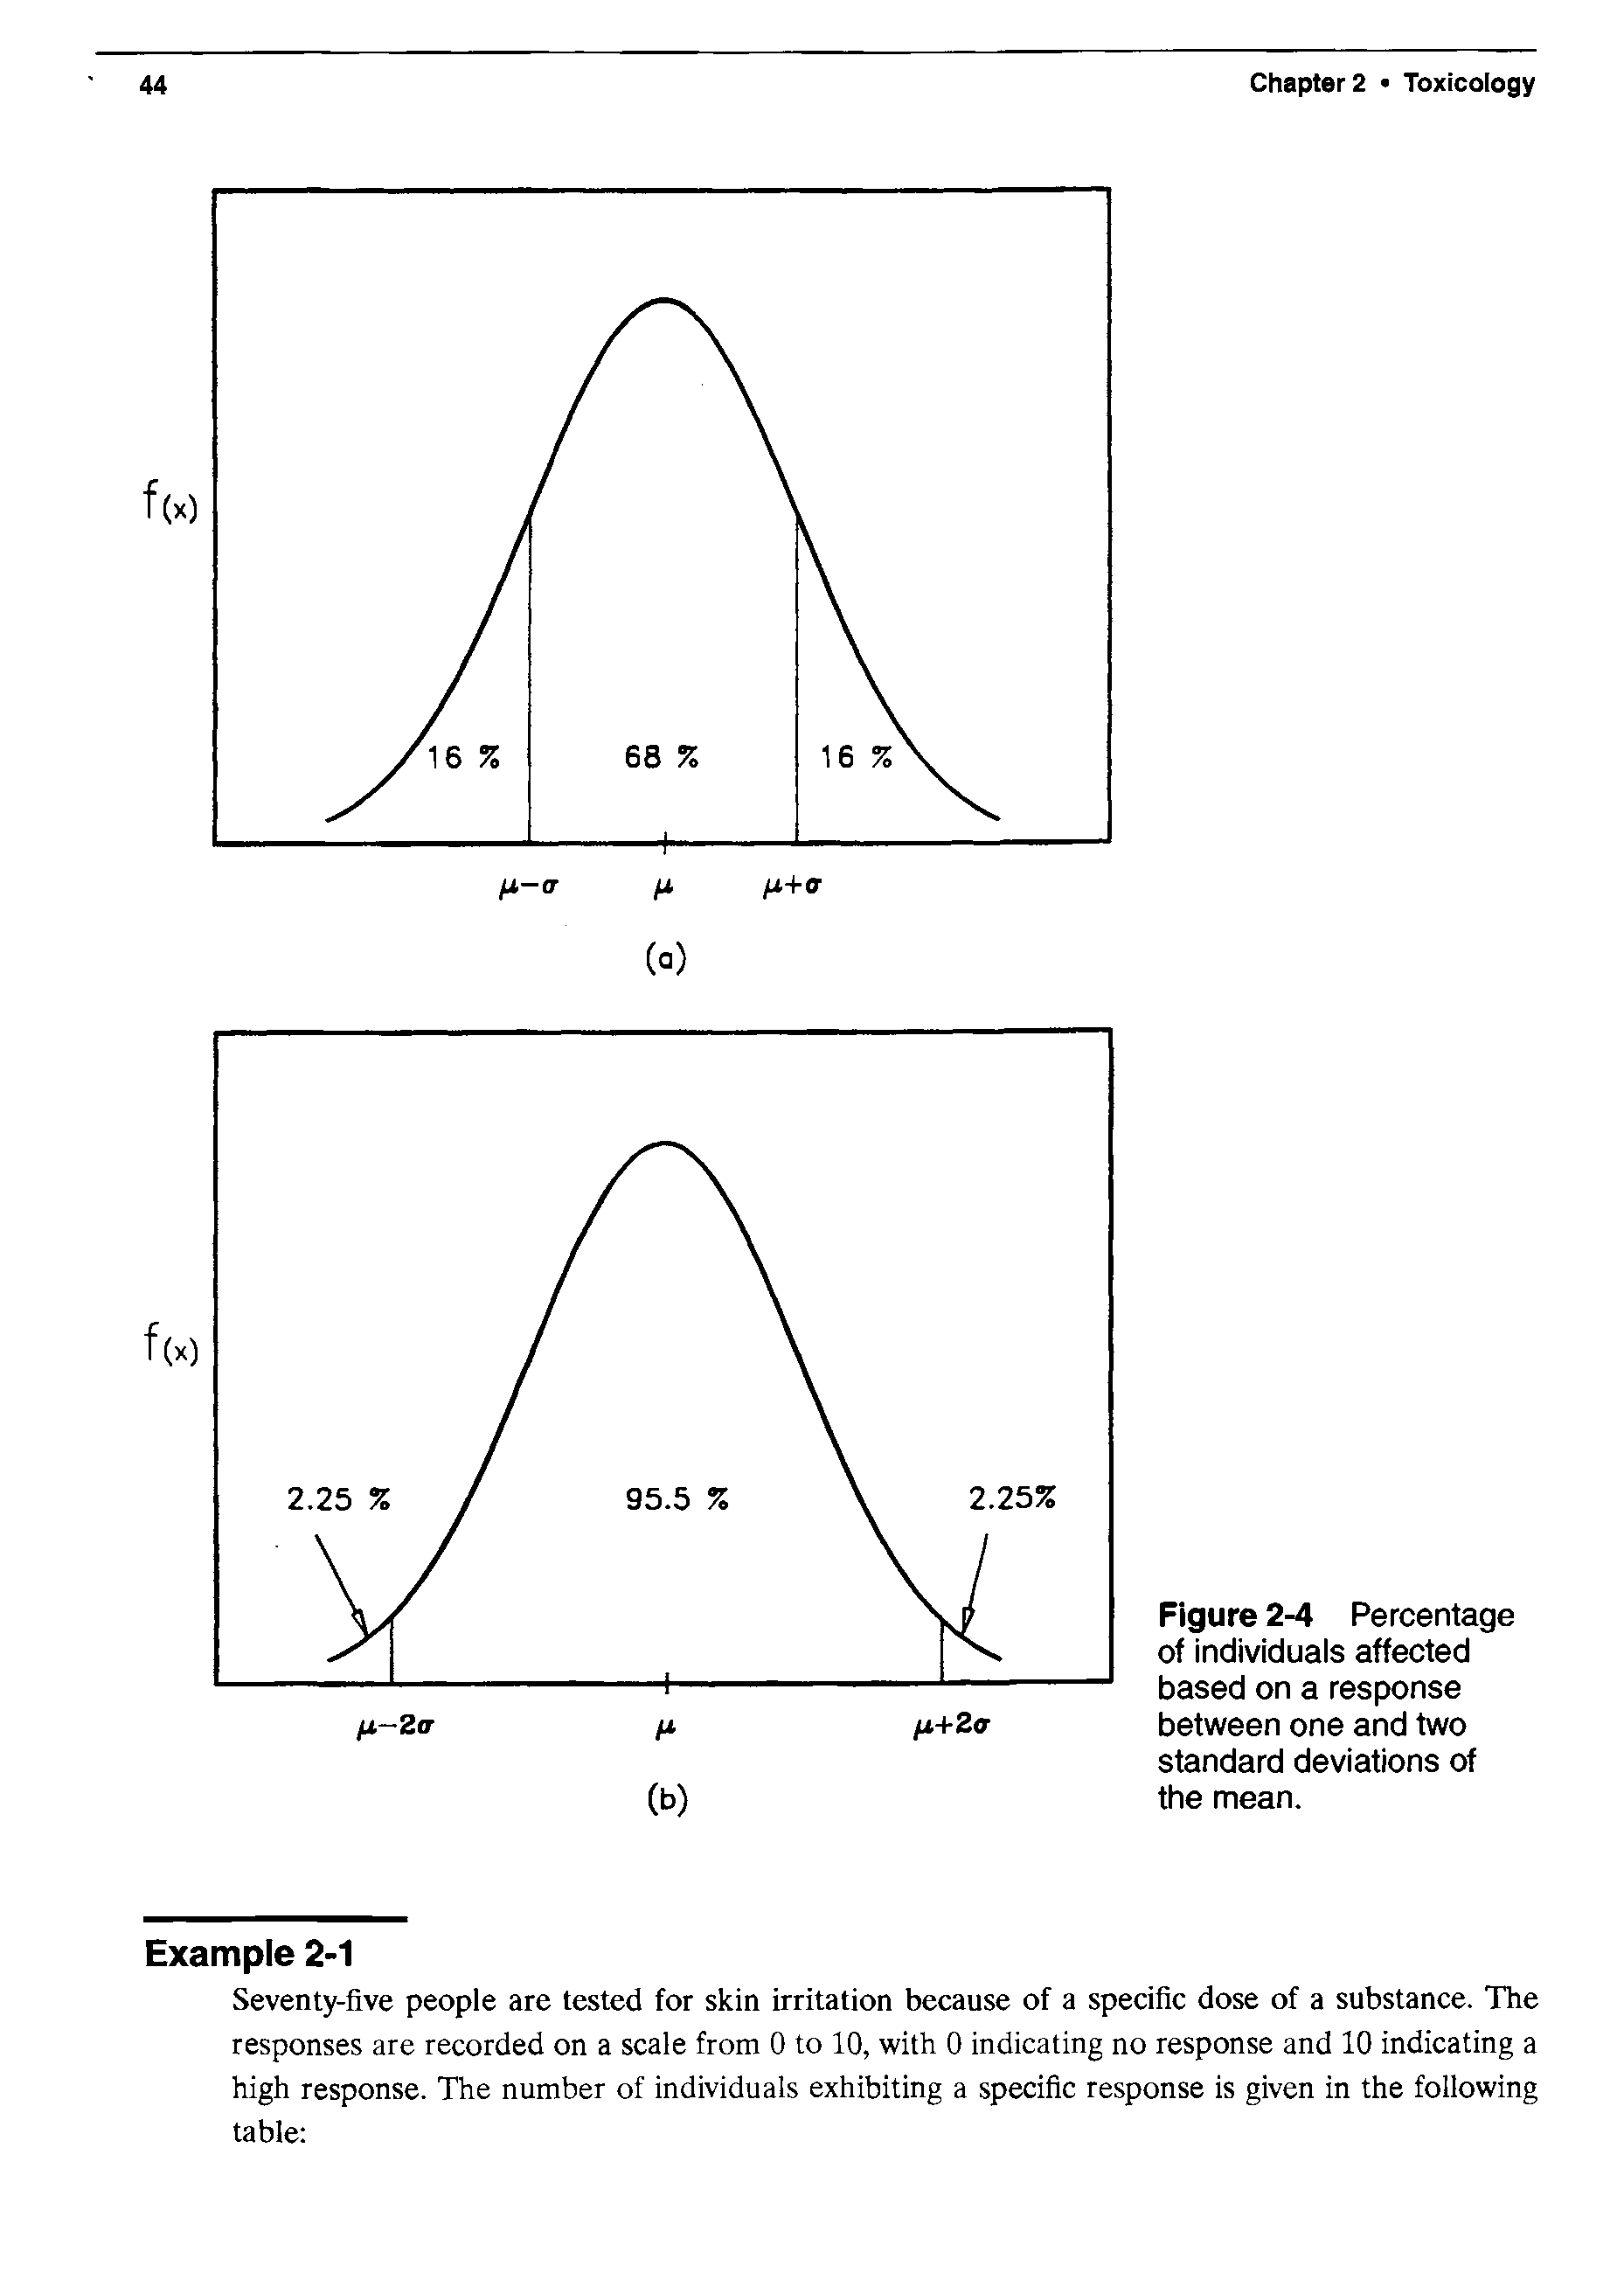 Figure 2-4 Percentage of individuals affected based on a response between one and two standard deviations of the mean.